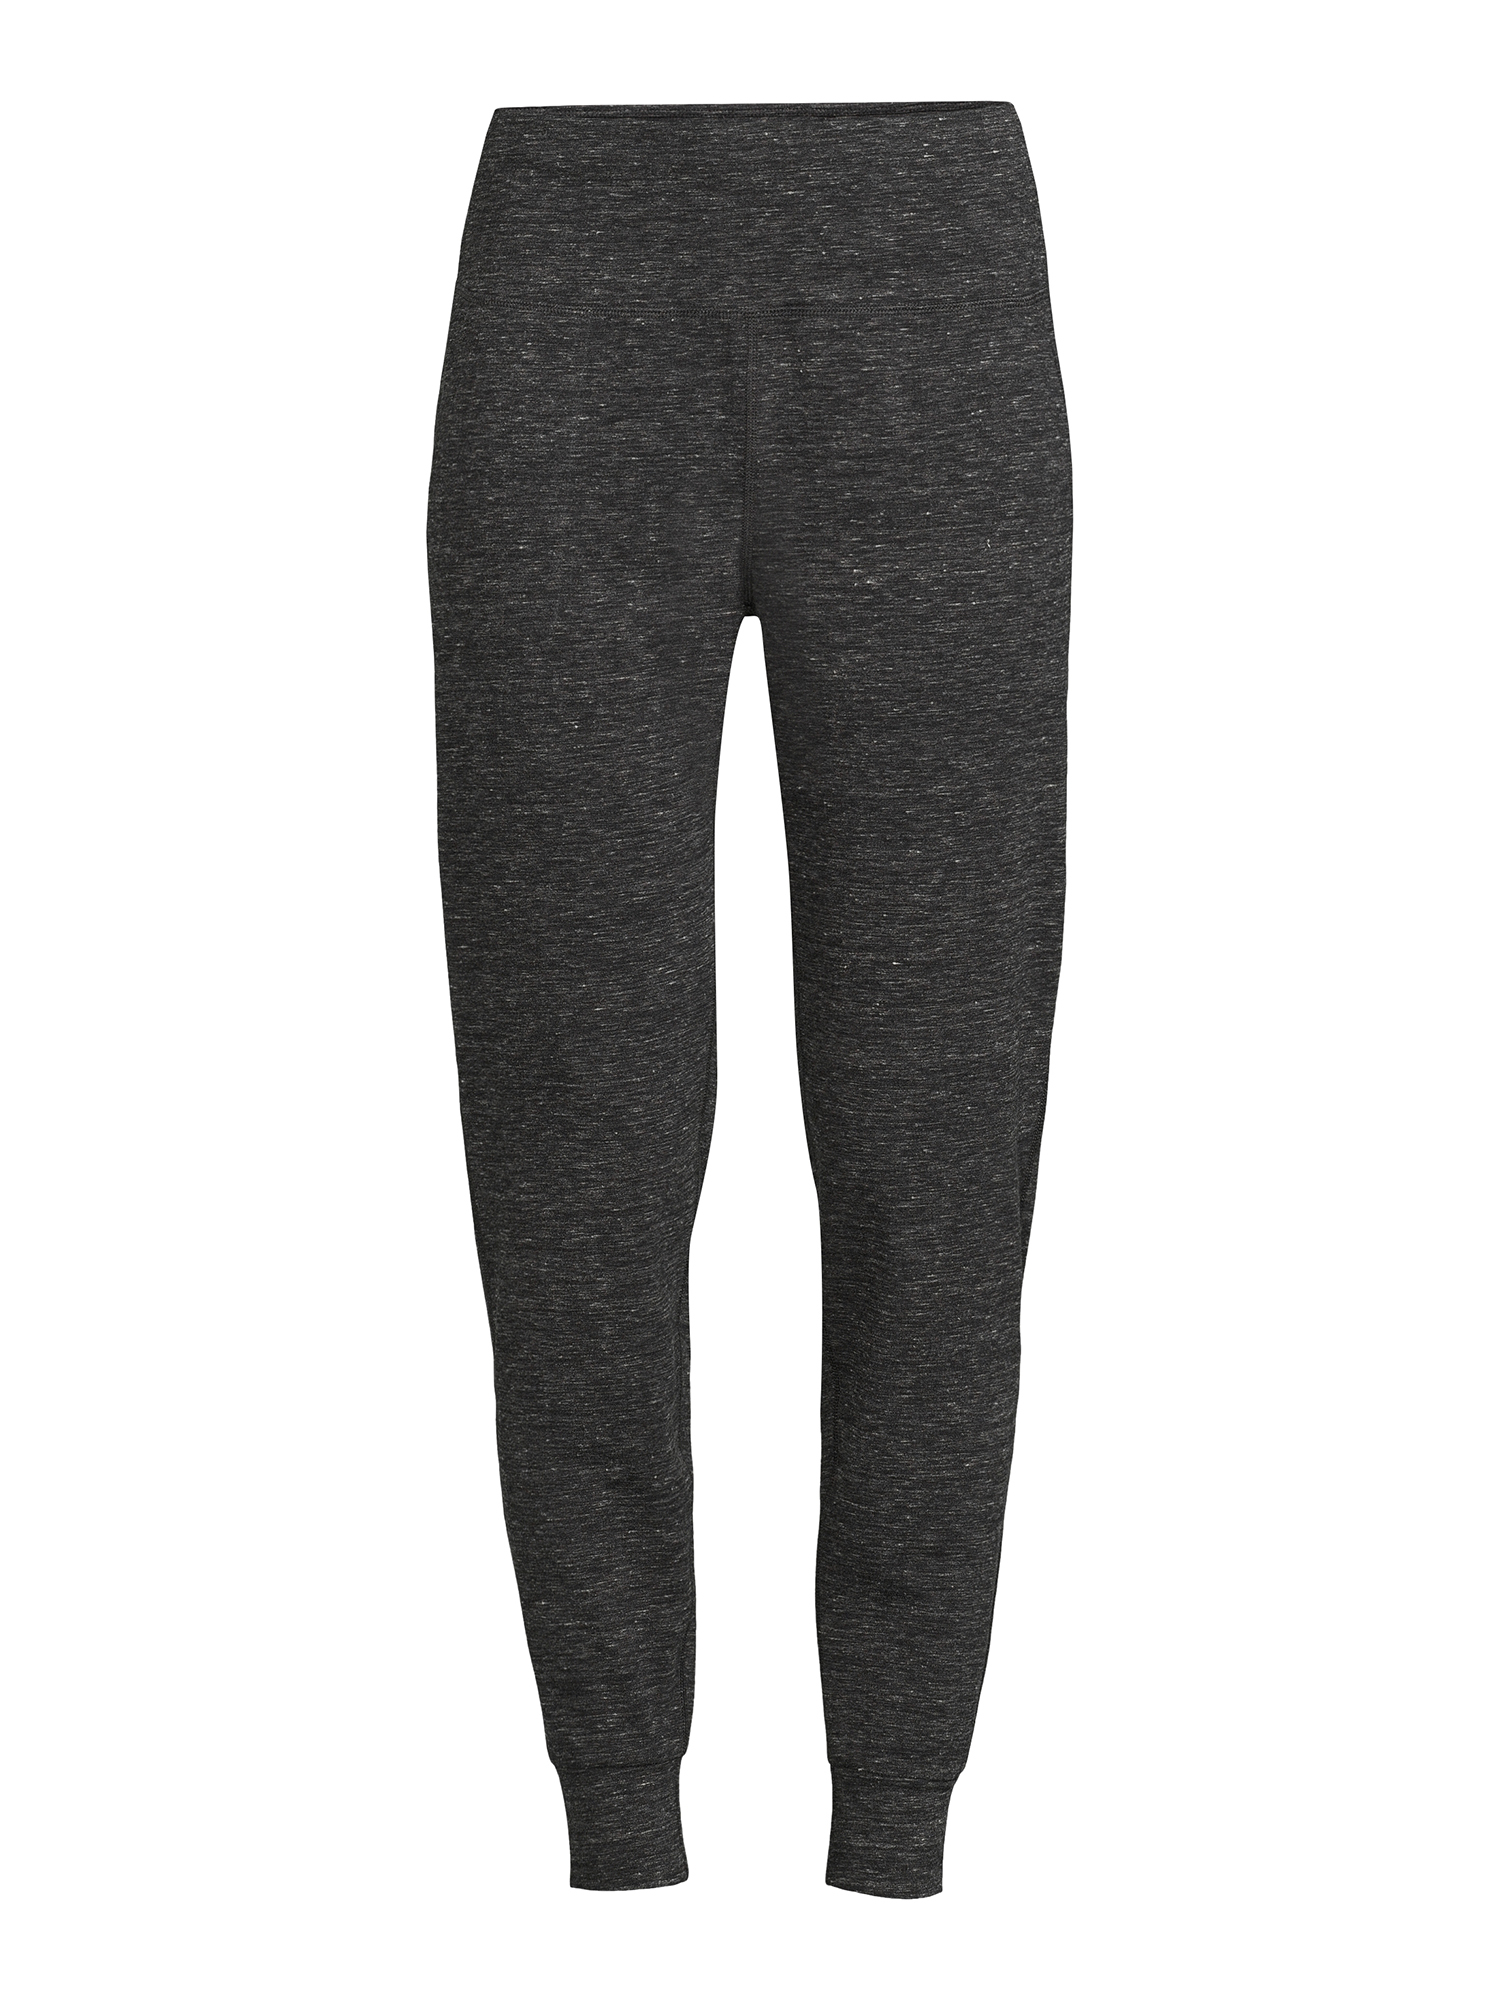 Athletic Works Woman's Soft Jogger Pants